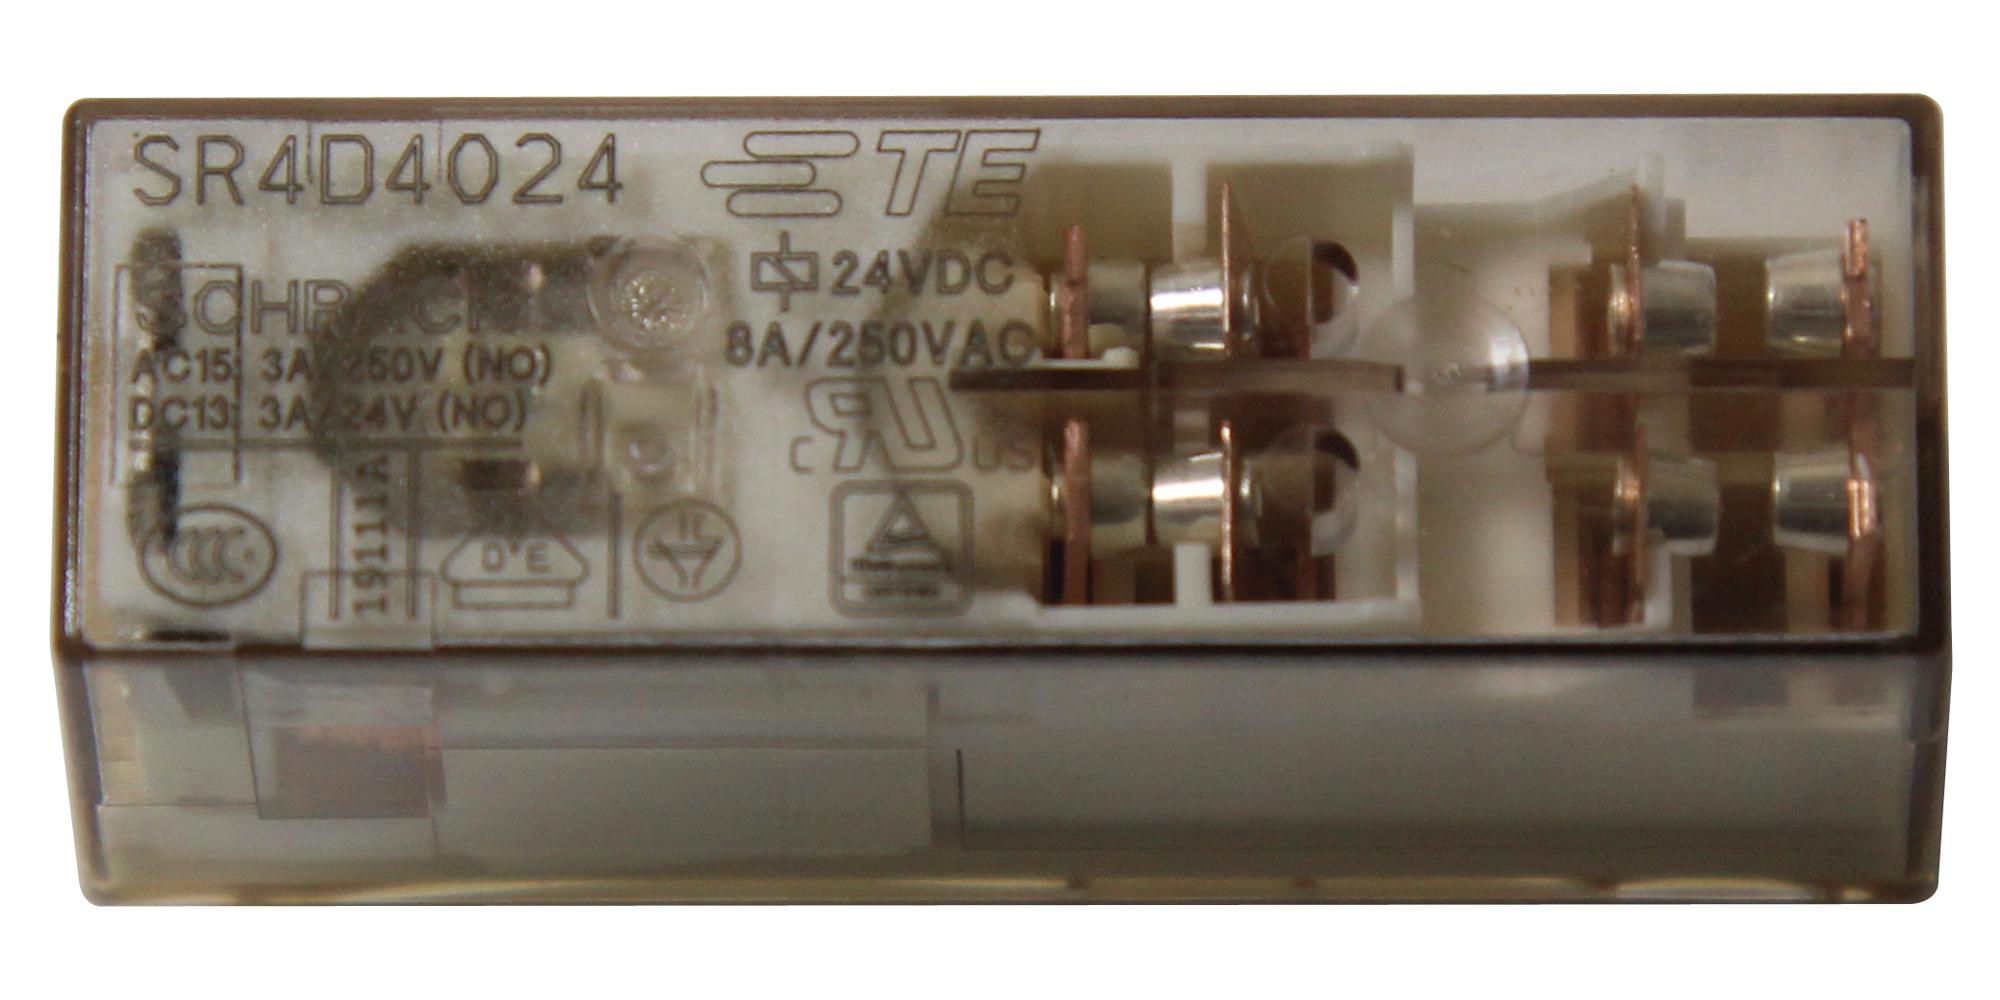 Schrack / Te Connectivity 3-1415055-1 Relay, Safety, Dpst-No, Nc, 250Vac, 8A